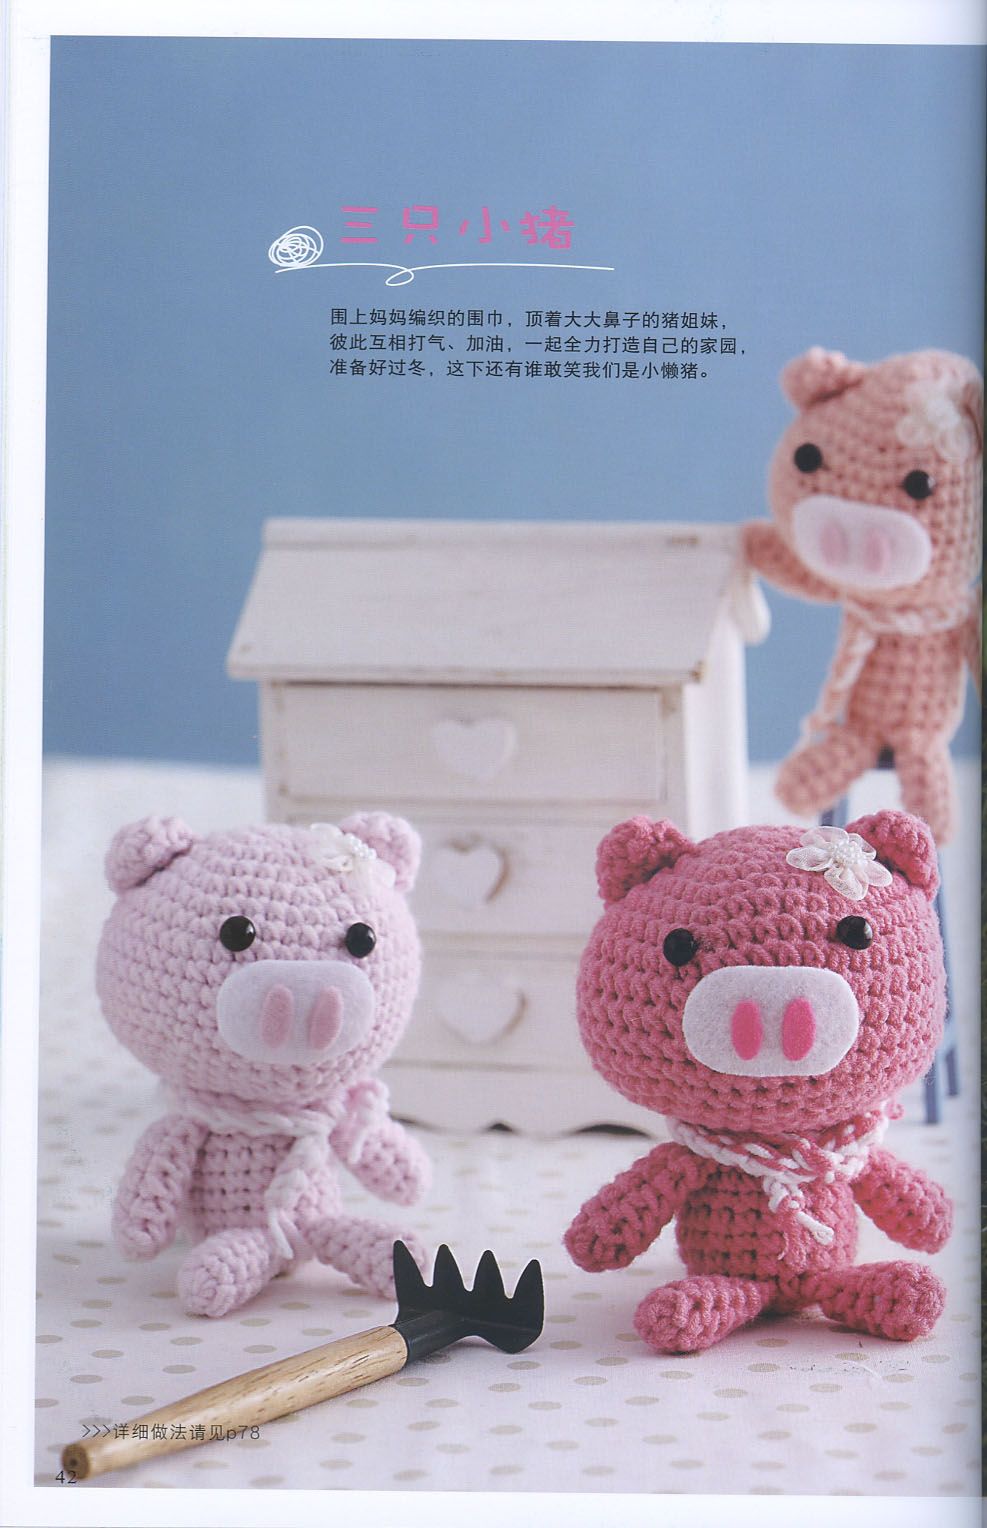 Little pink and white pigs amigurumi pattern (1)